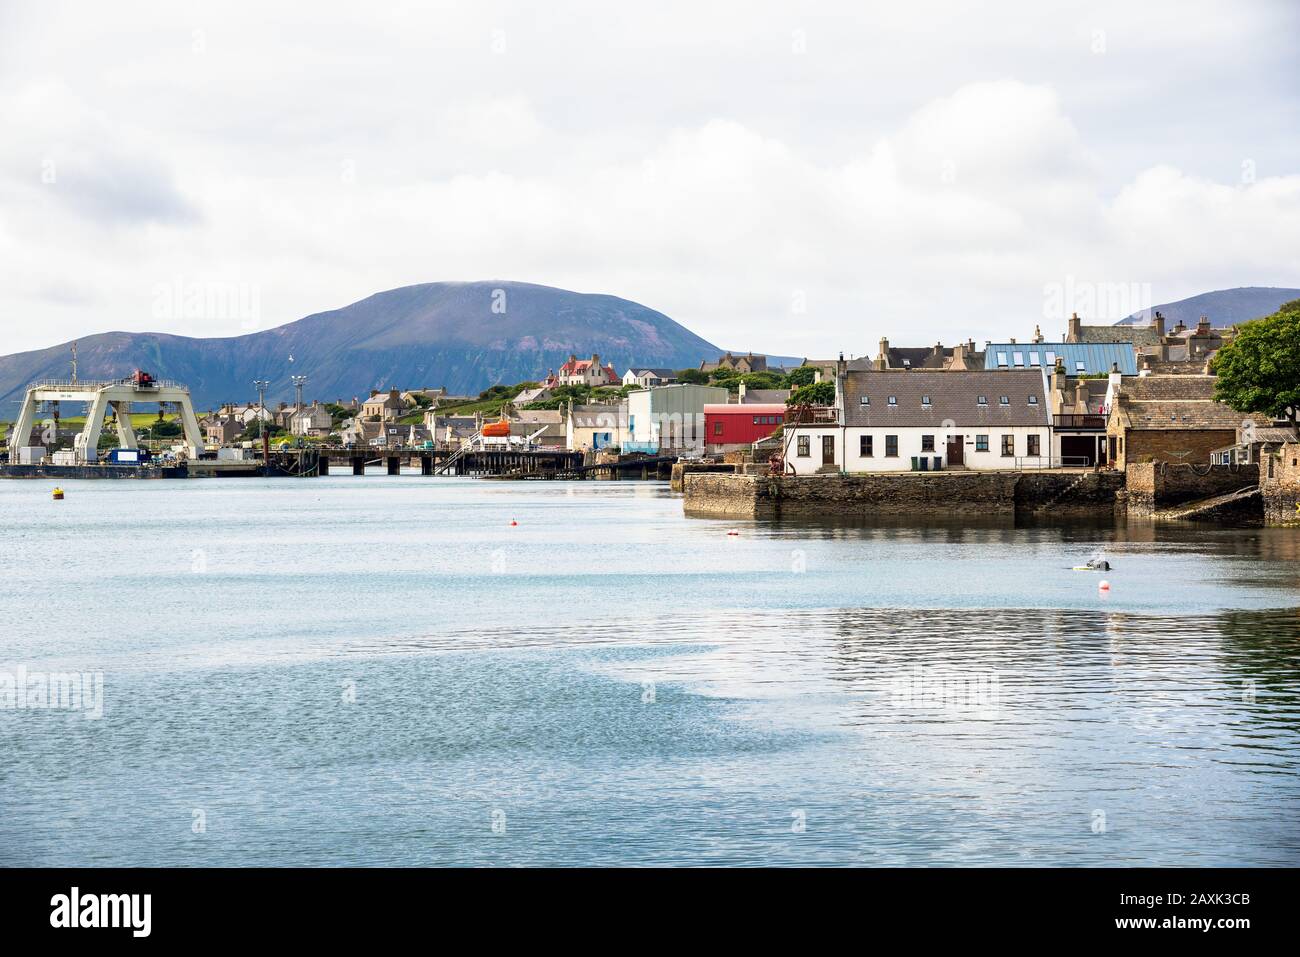 Waterfront of a coastal town on a cloudy spring day. A mountain is visible in background. Stock Photo